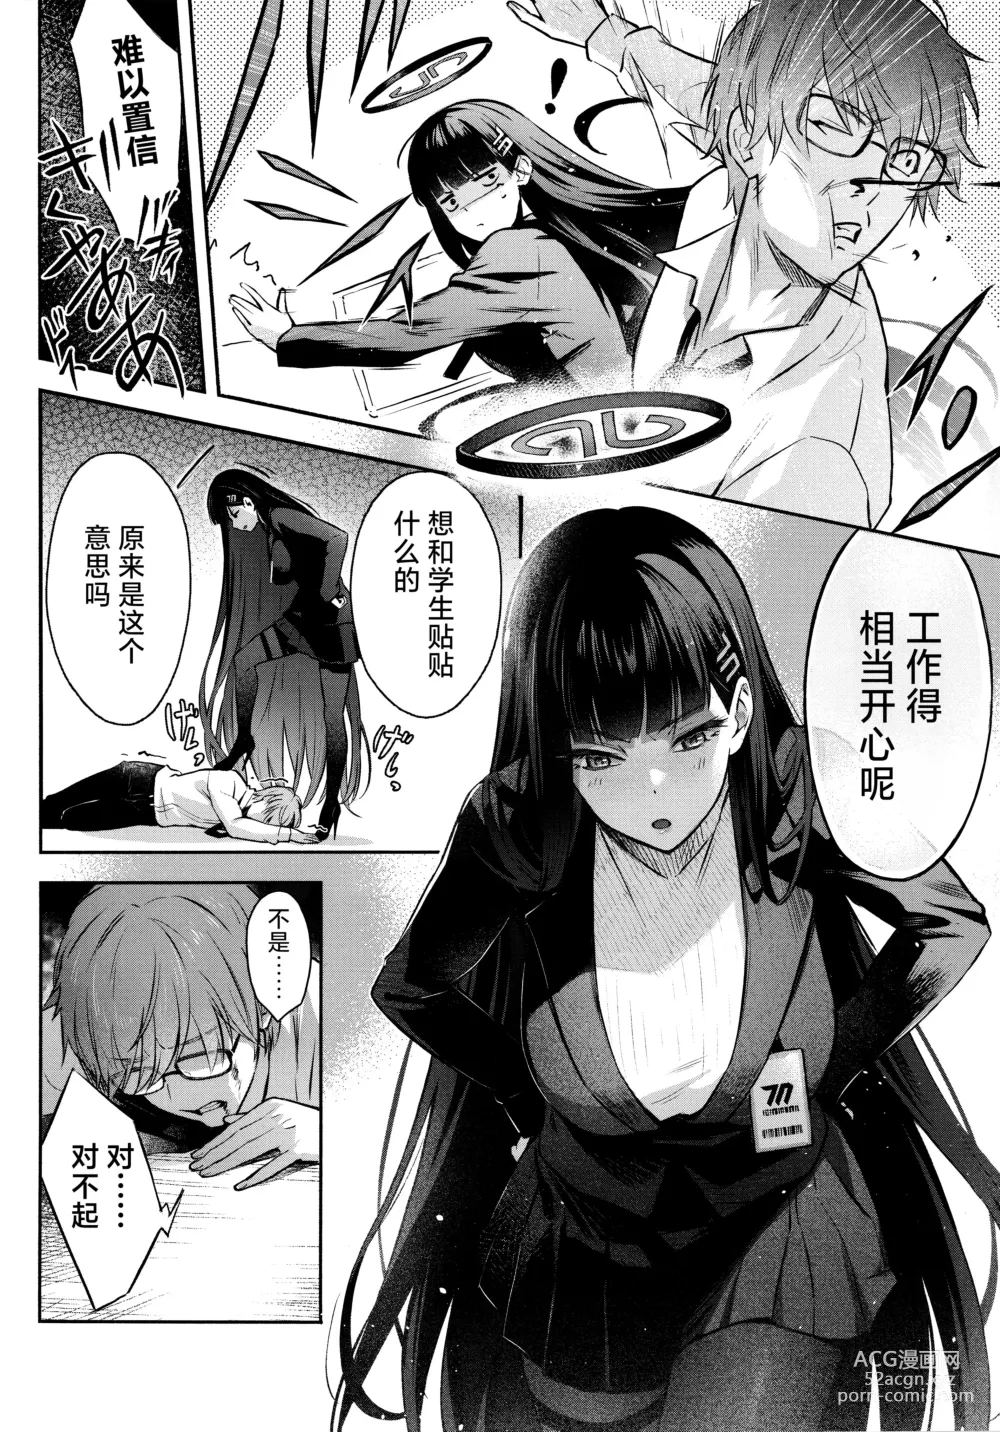 Page 7 of doujinshi 会长亲之恋